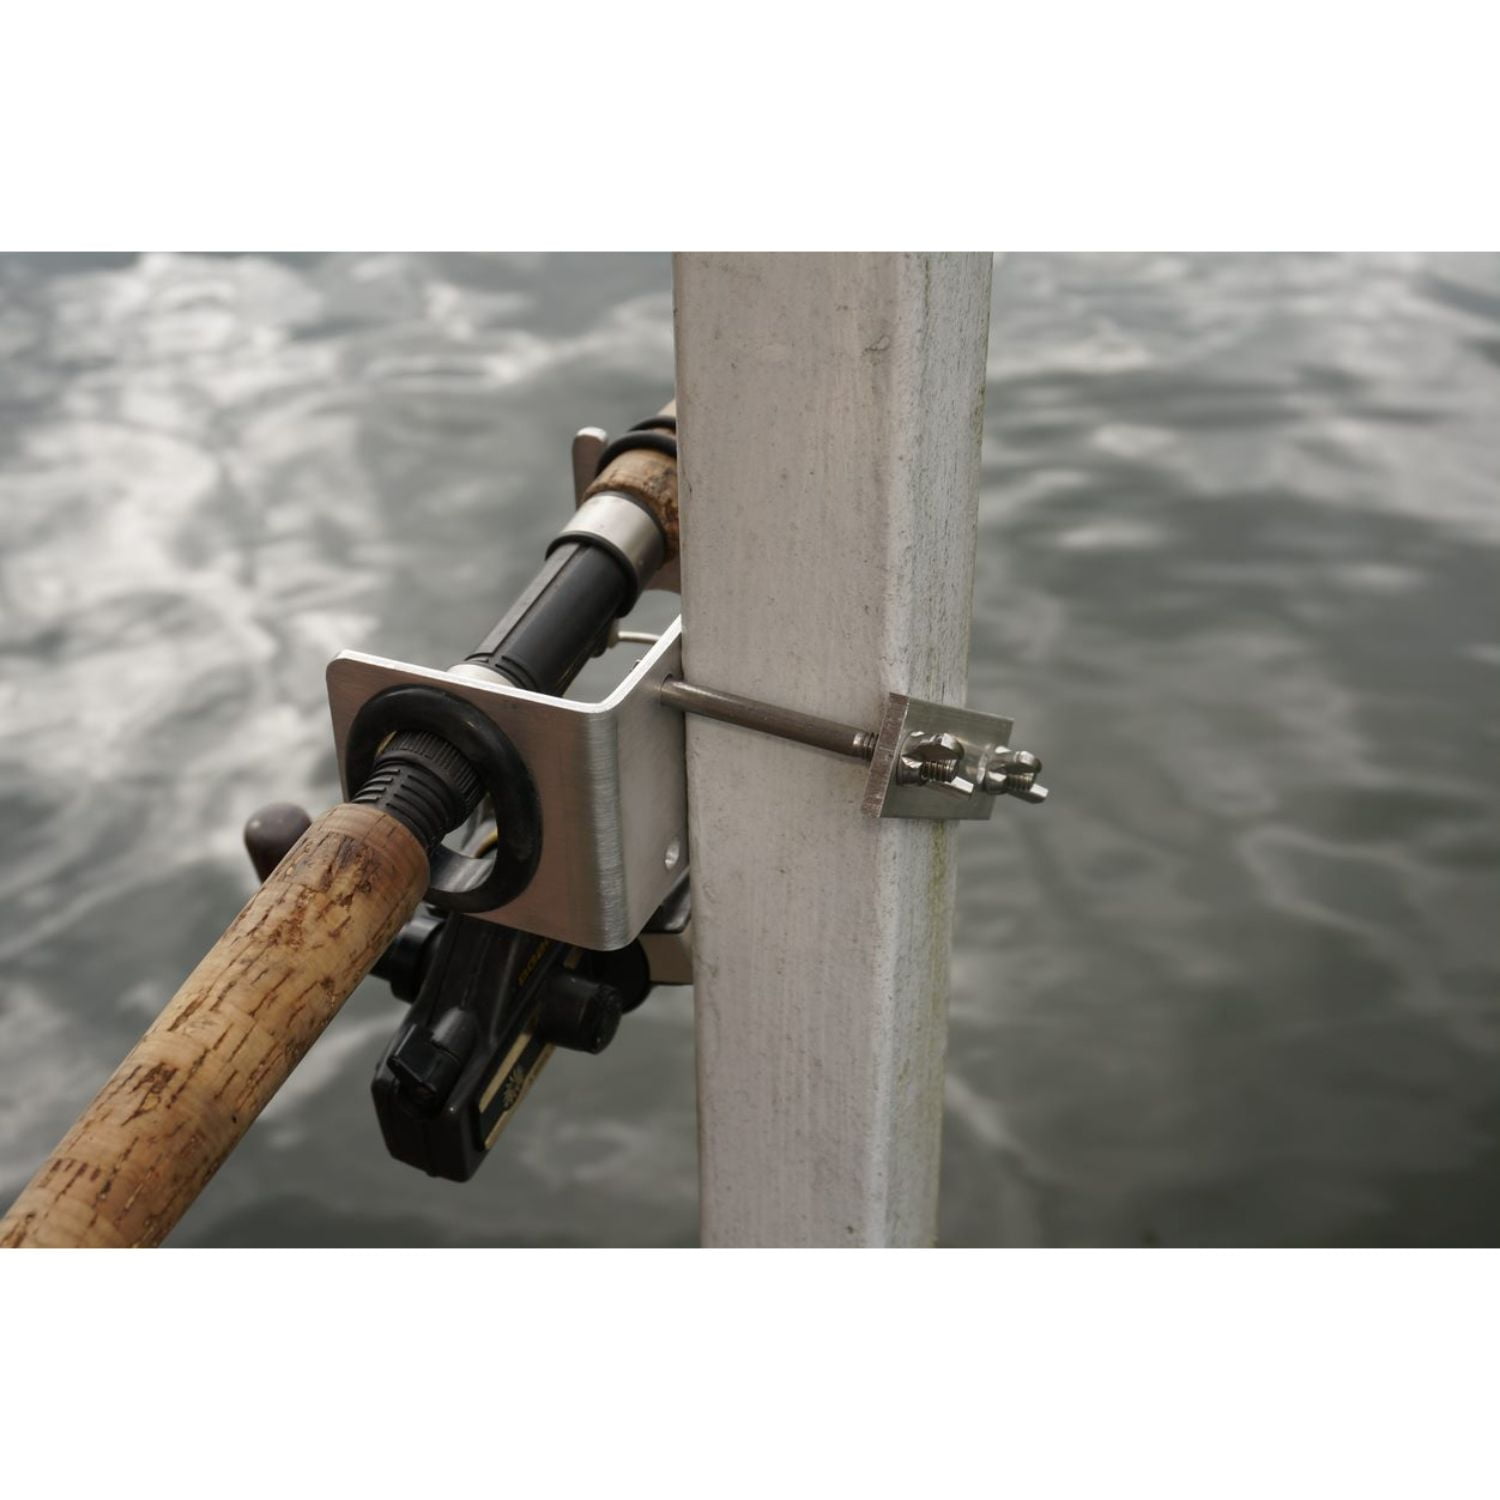 Need a rod holder solution for a dock